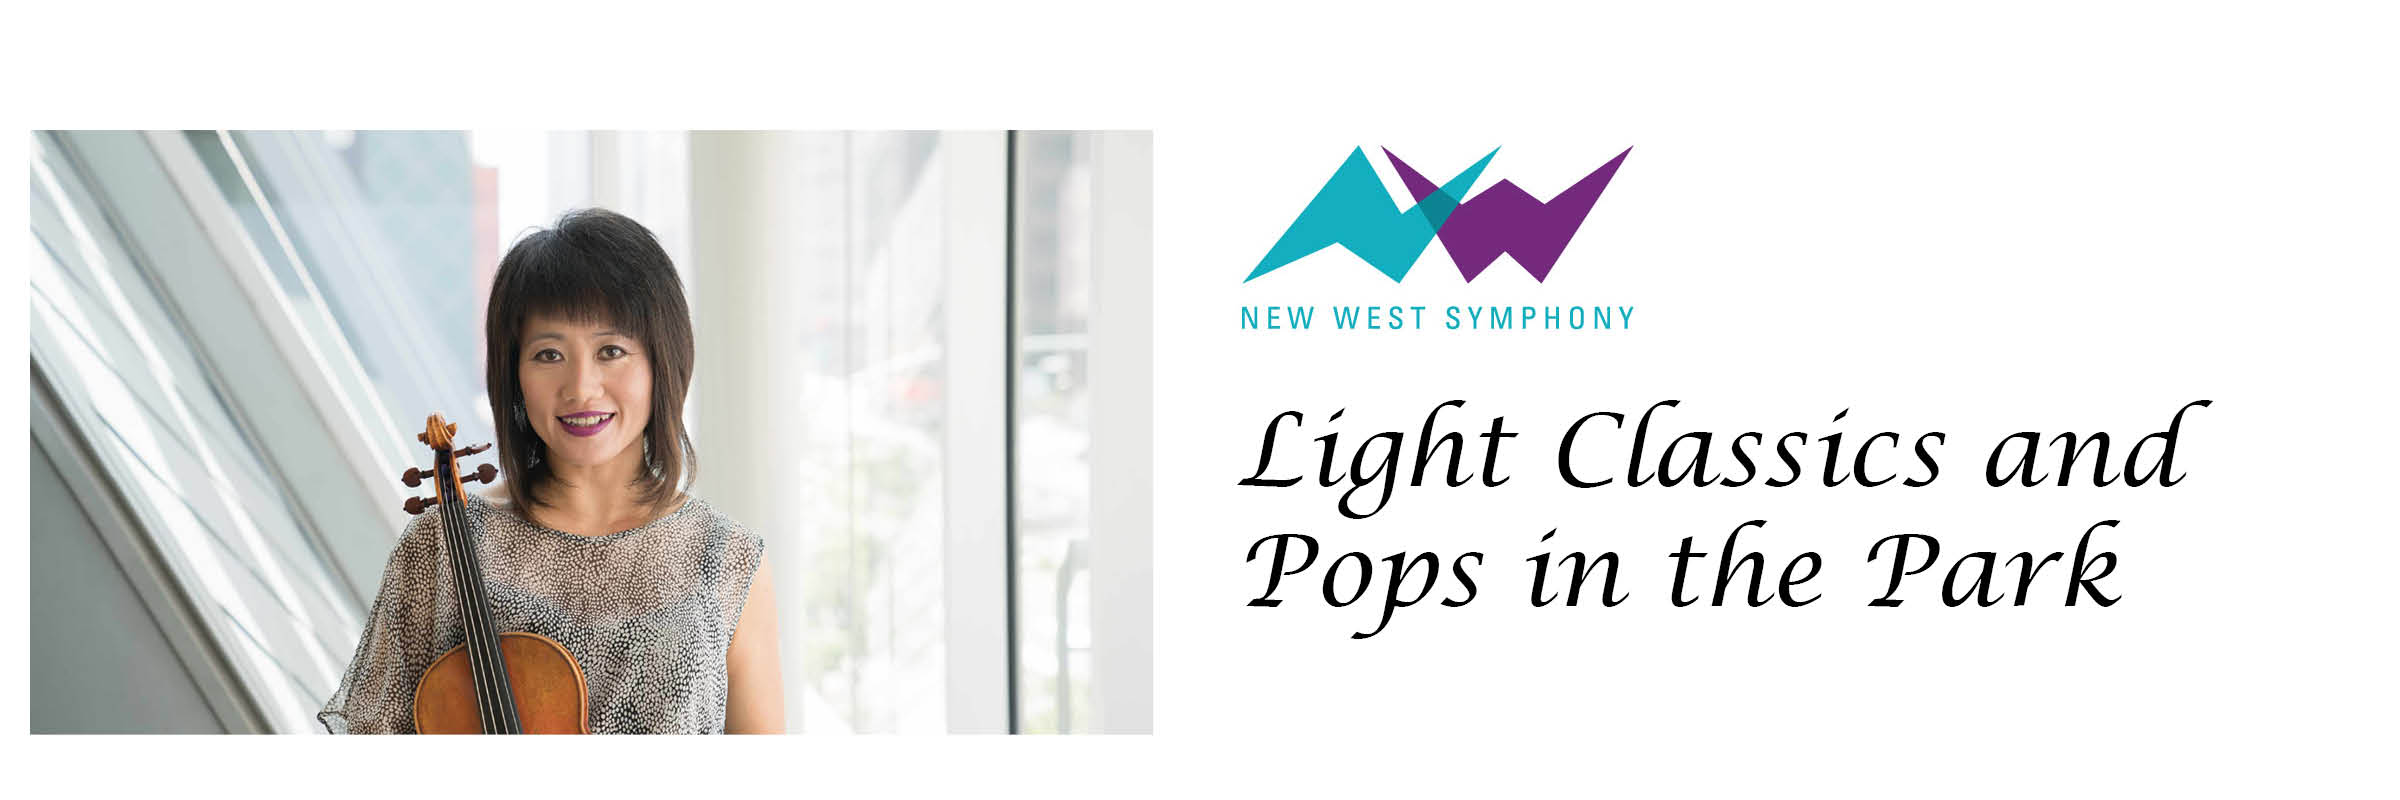 New West Symphony: Pops in the Park